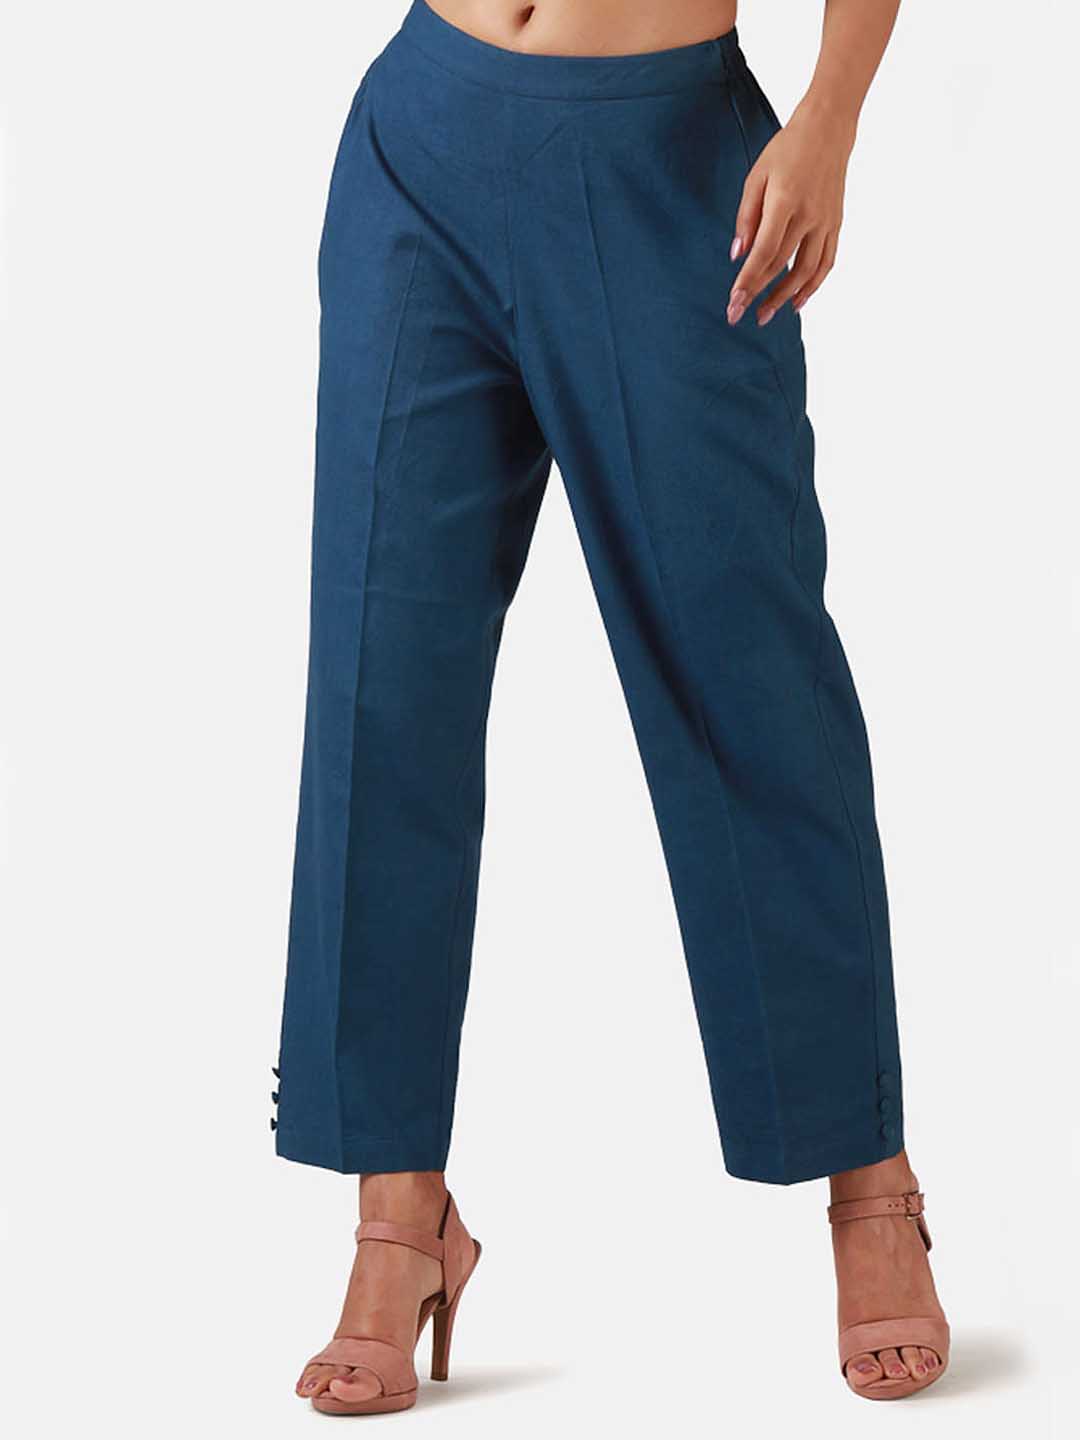 Ladies Cotton Trousers Manufacturers, Suppliers and Exporters